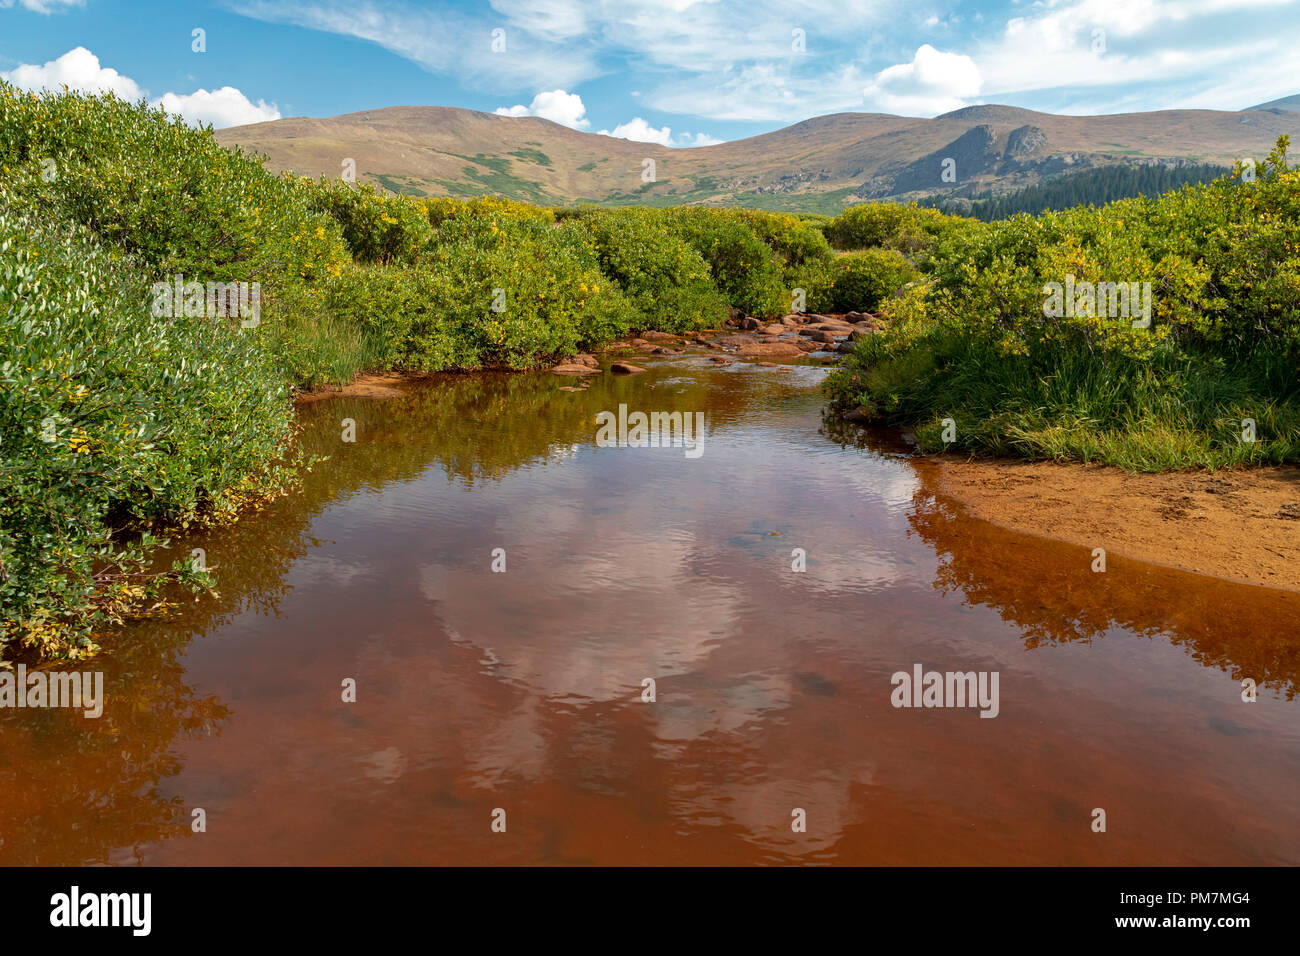 Georgetown, Colorado - A stream in the Rocky Mountains at Guanella Pass, below 14,060-foot Mt. Bierstadt in the Mt. Evans Wilderness Area. Stock Photo